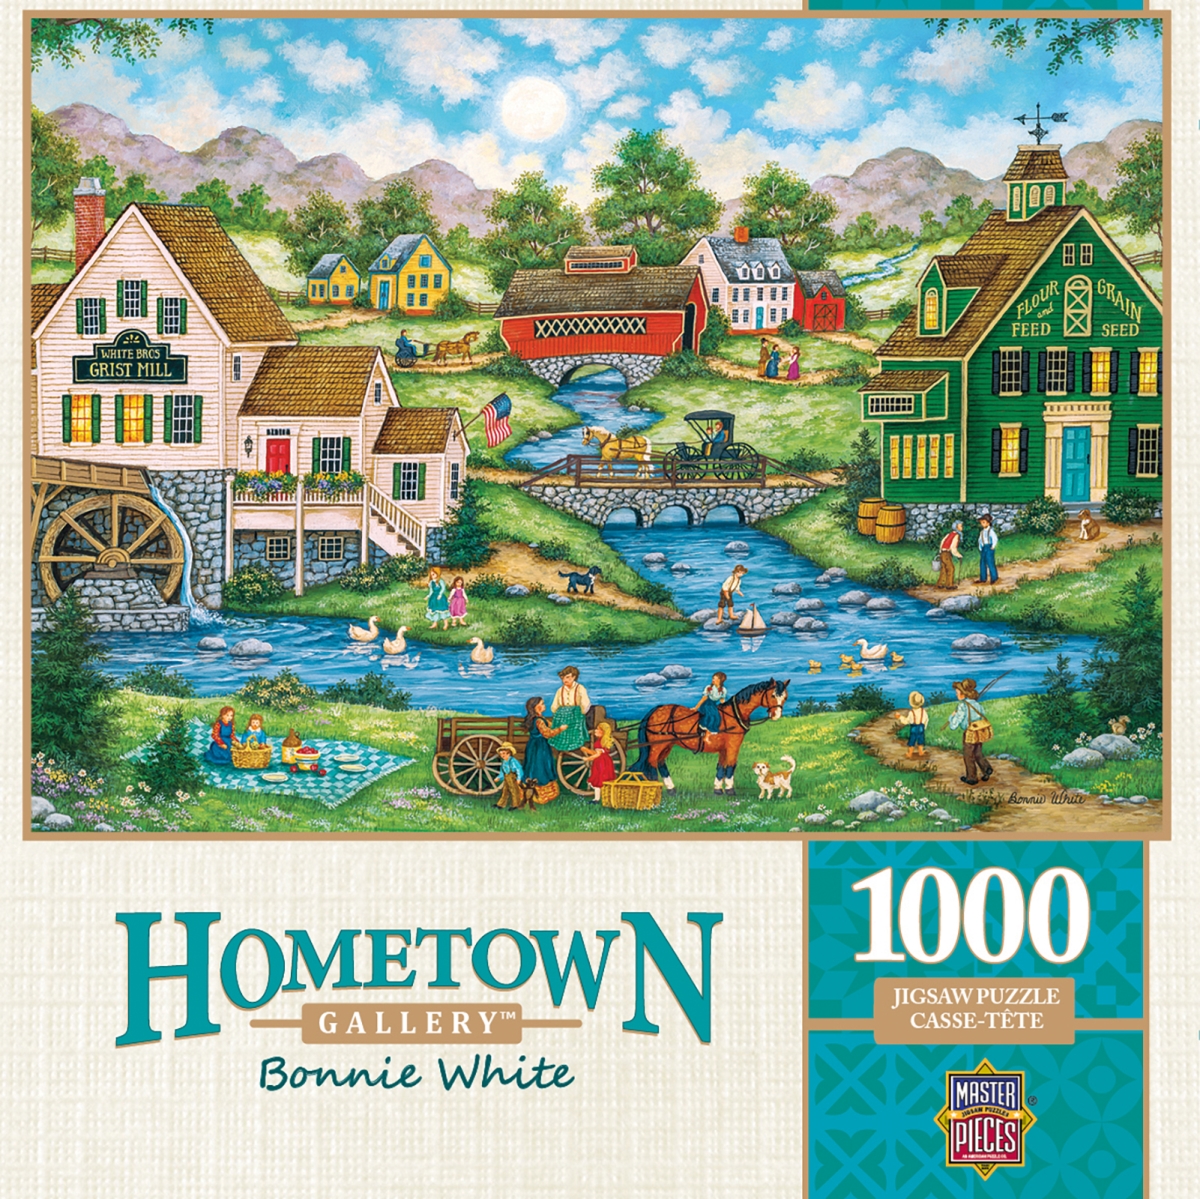 71732 19.25 X 26.75 In. Bonnie White Hometown Gallery Millside Picnic Jigsaw Puzzle - 1000 Piece